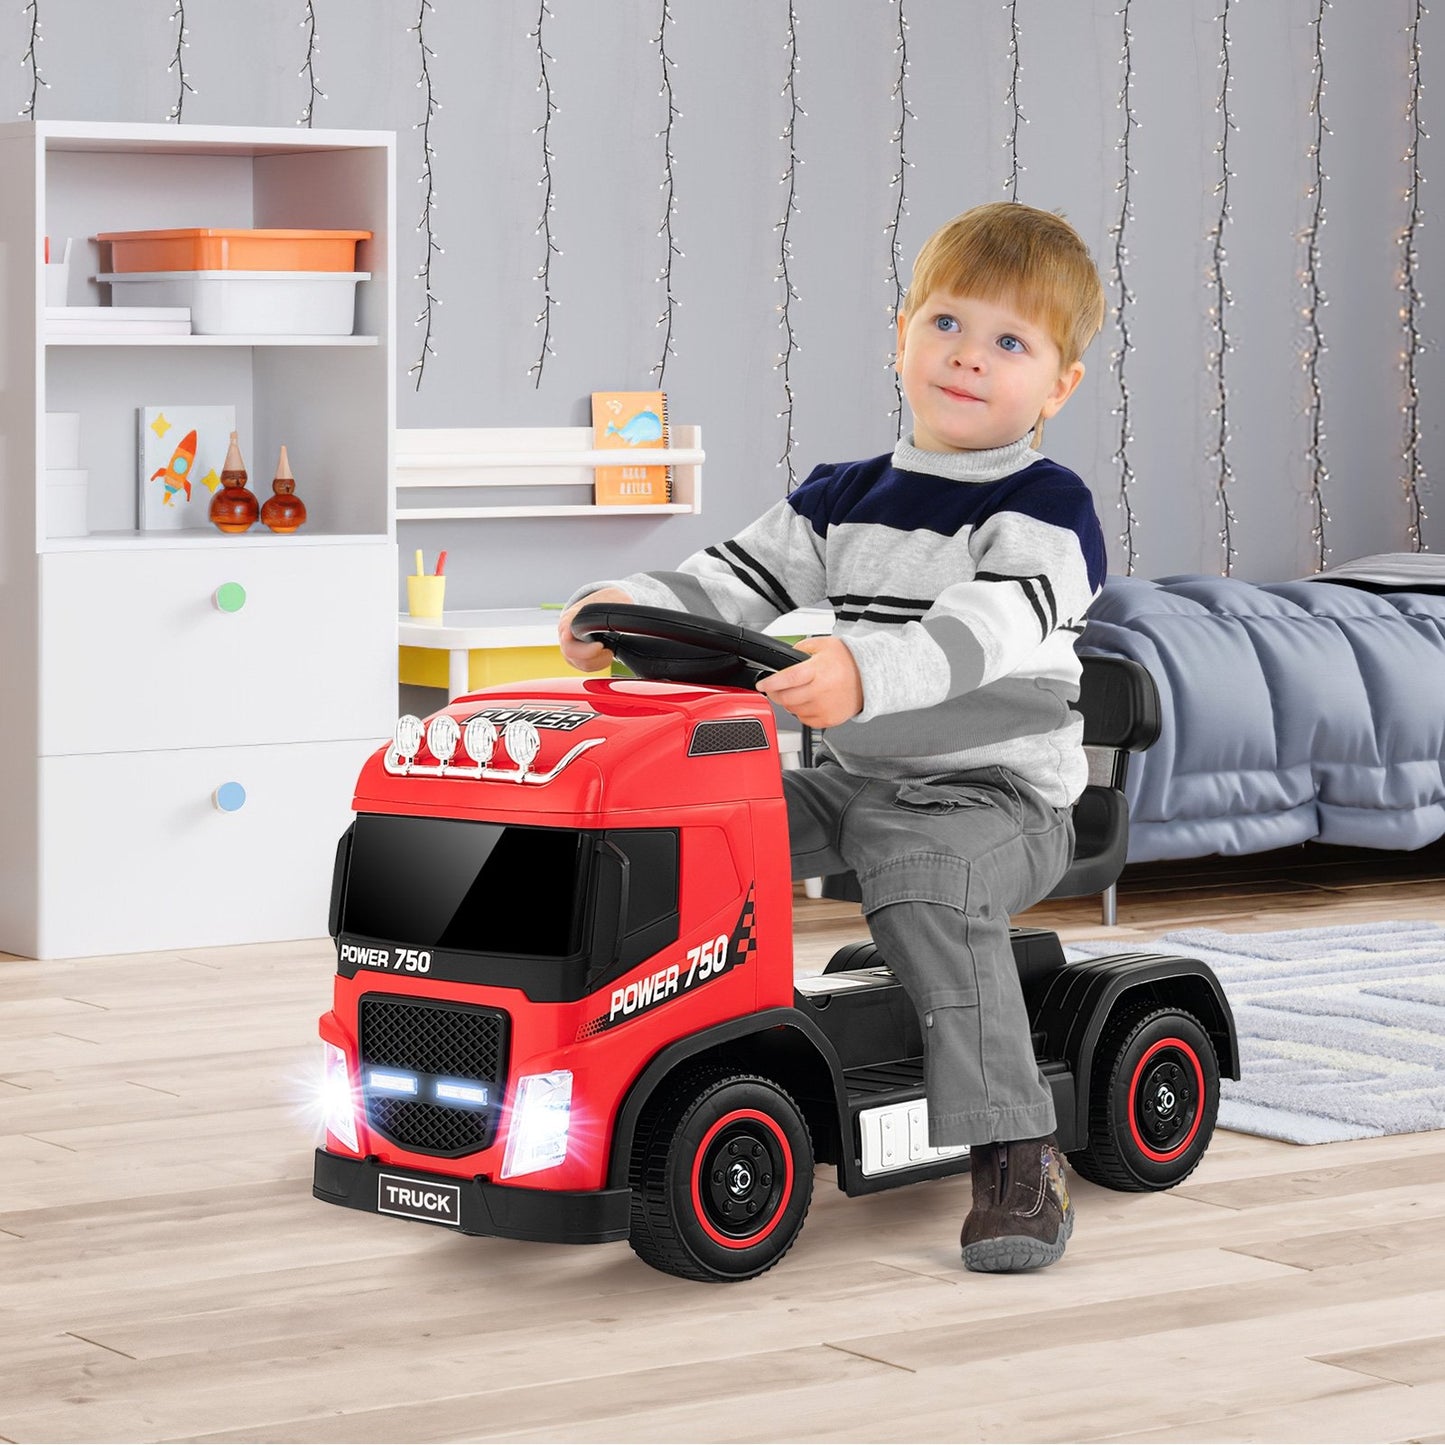 6V Kids Electric Ride-on Truck with Height Adjustable Seat, Red